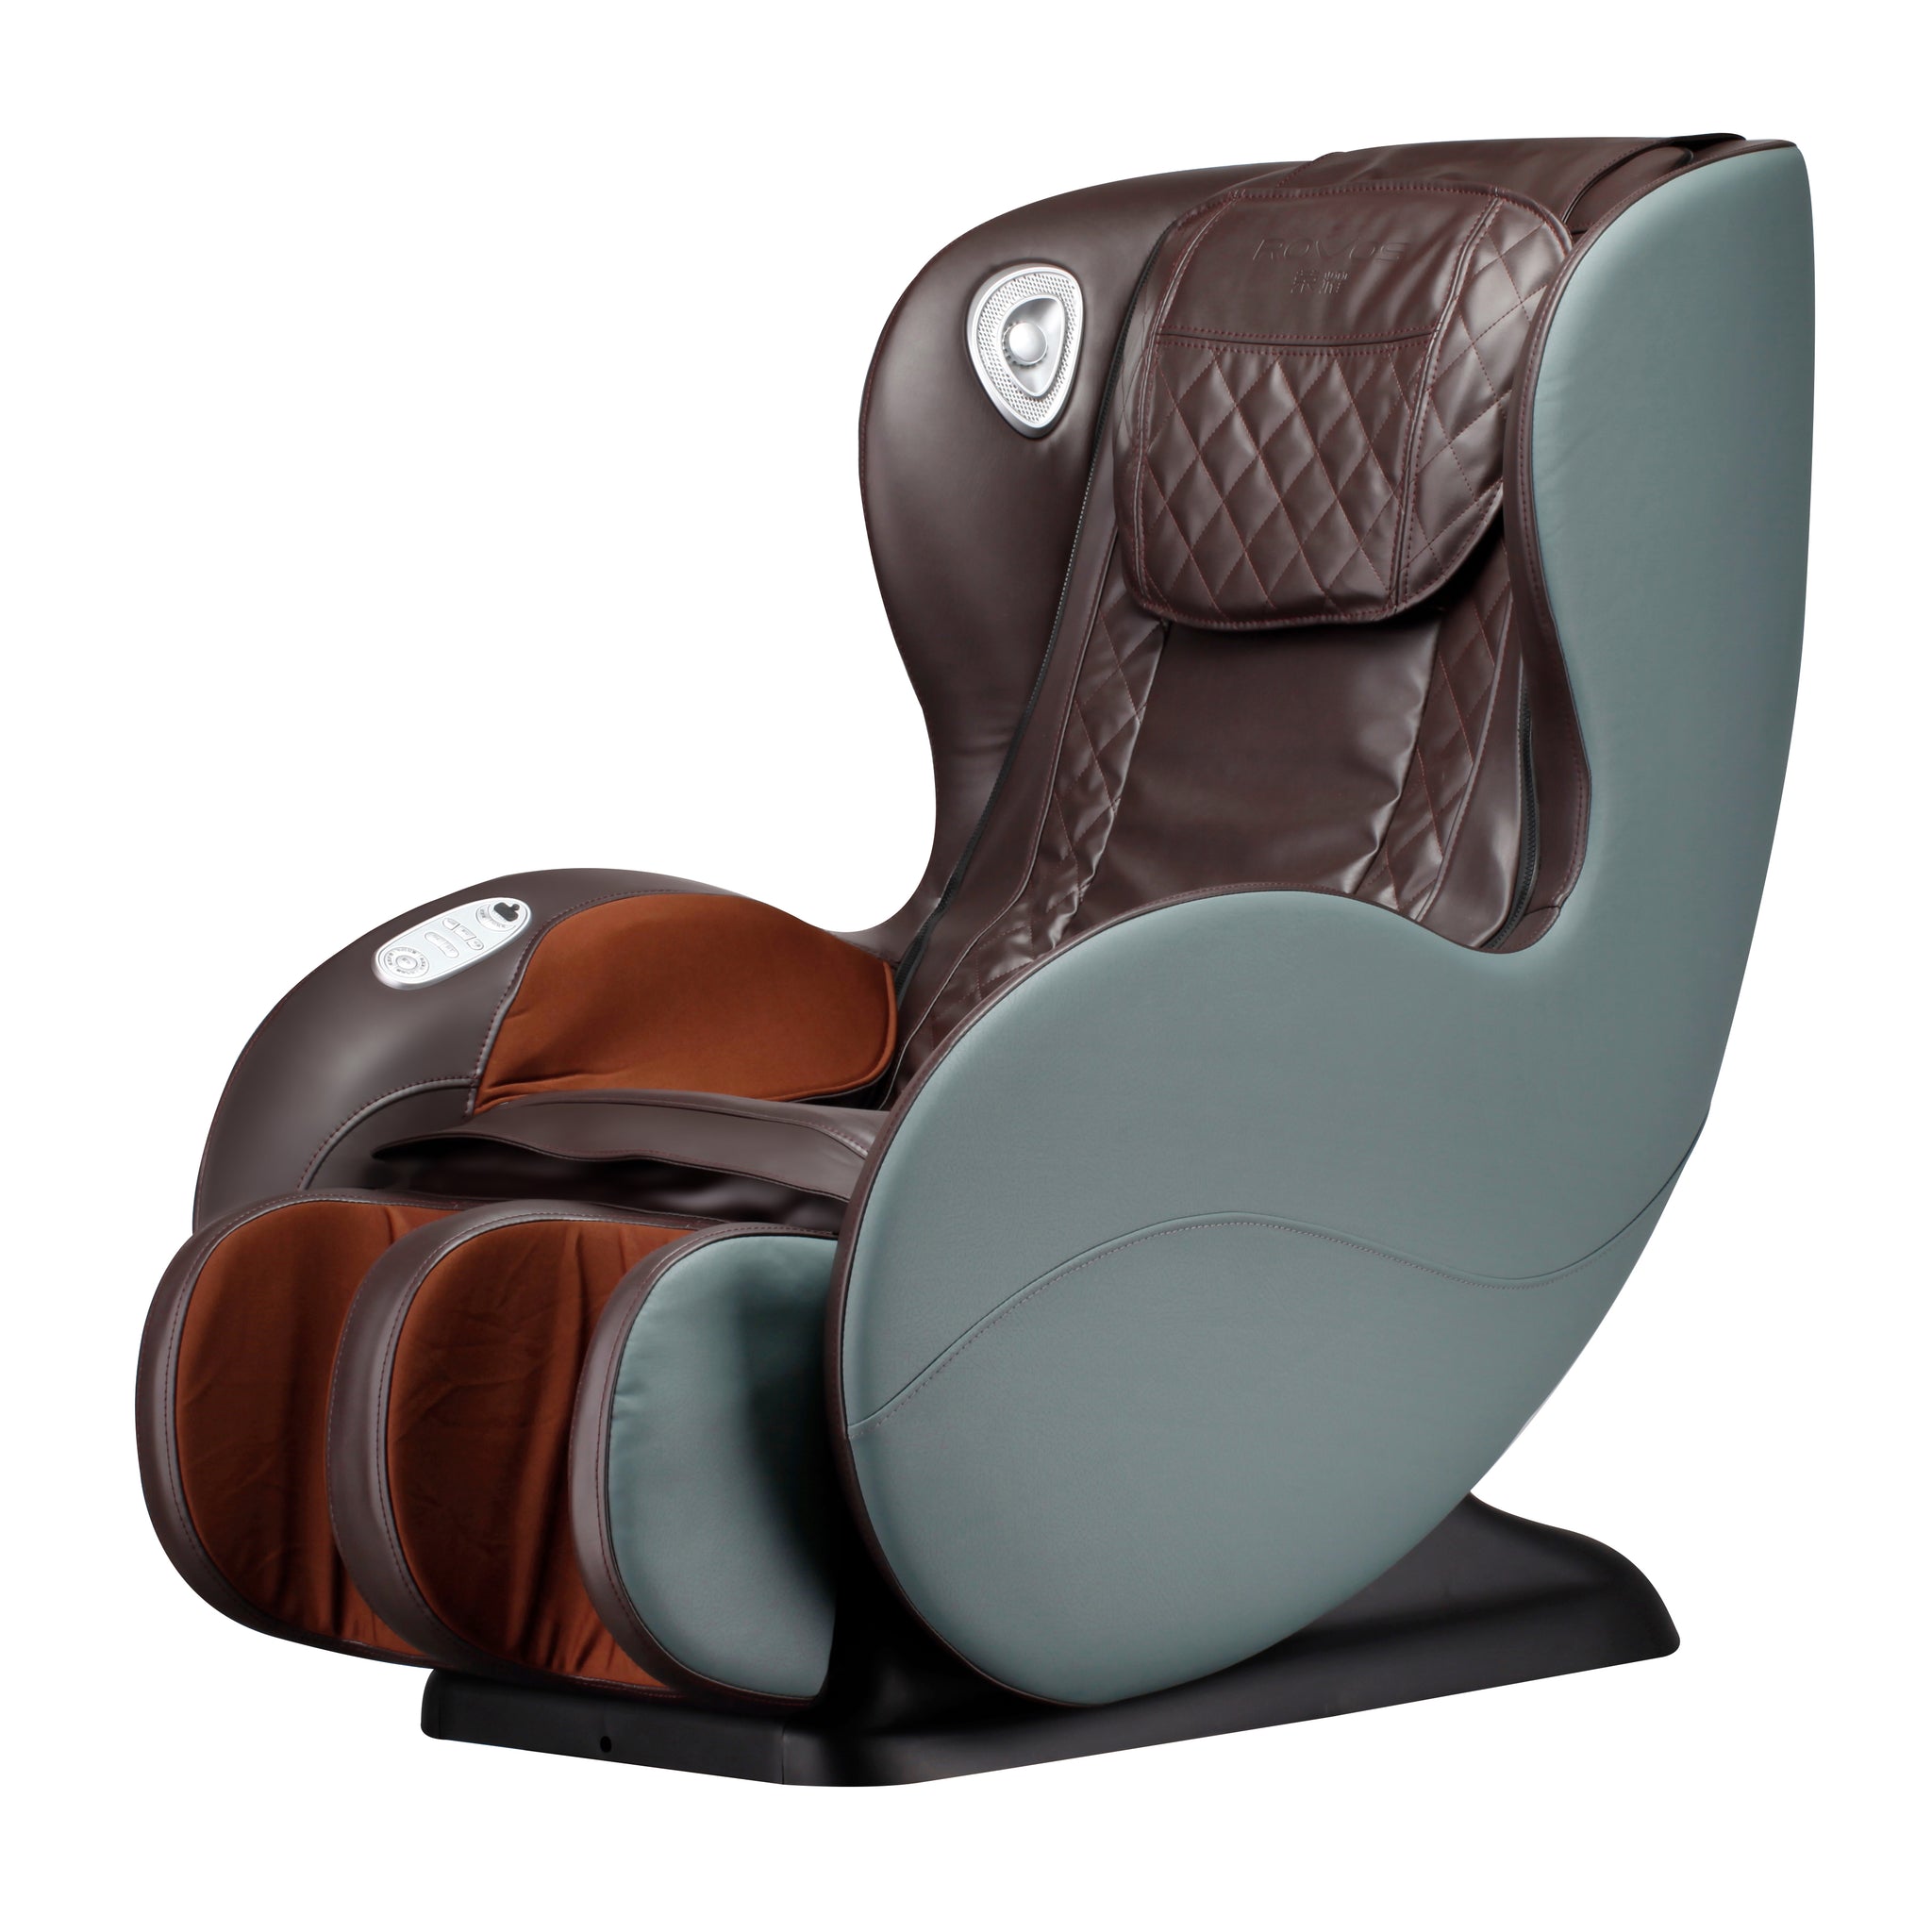 Massage Chairs SL Track Full Body and Recliner, Shiatsu Recliner, Massage Chair with Bluetooth Speaker